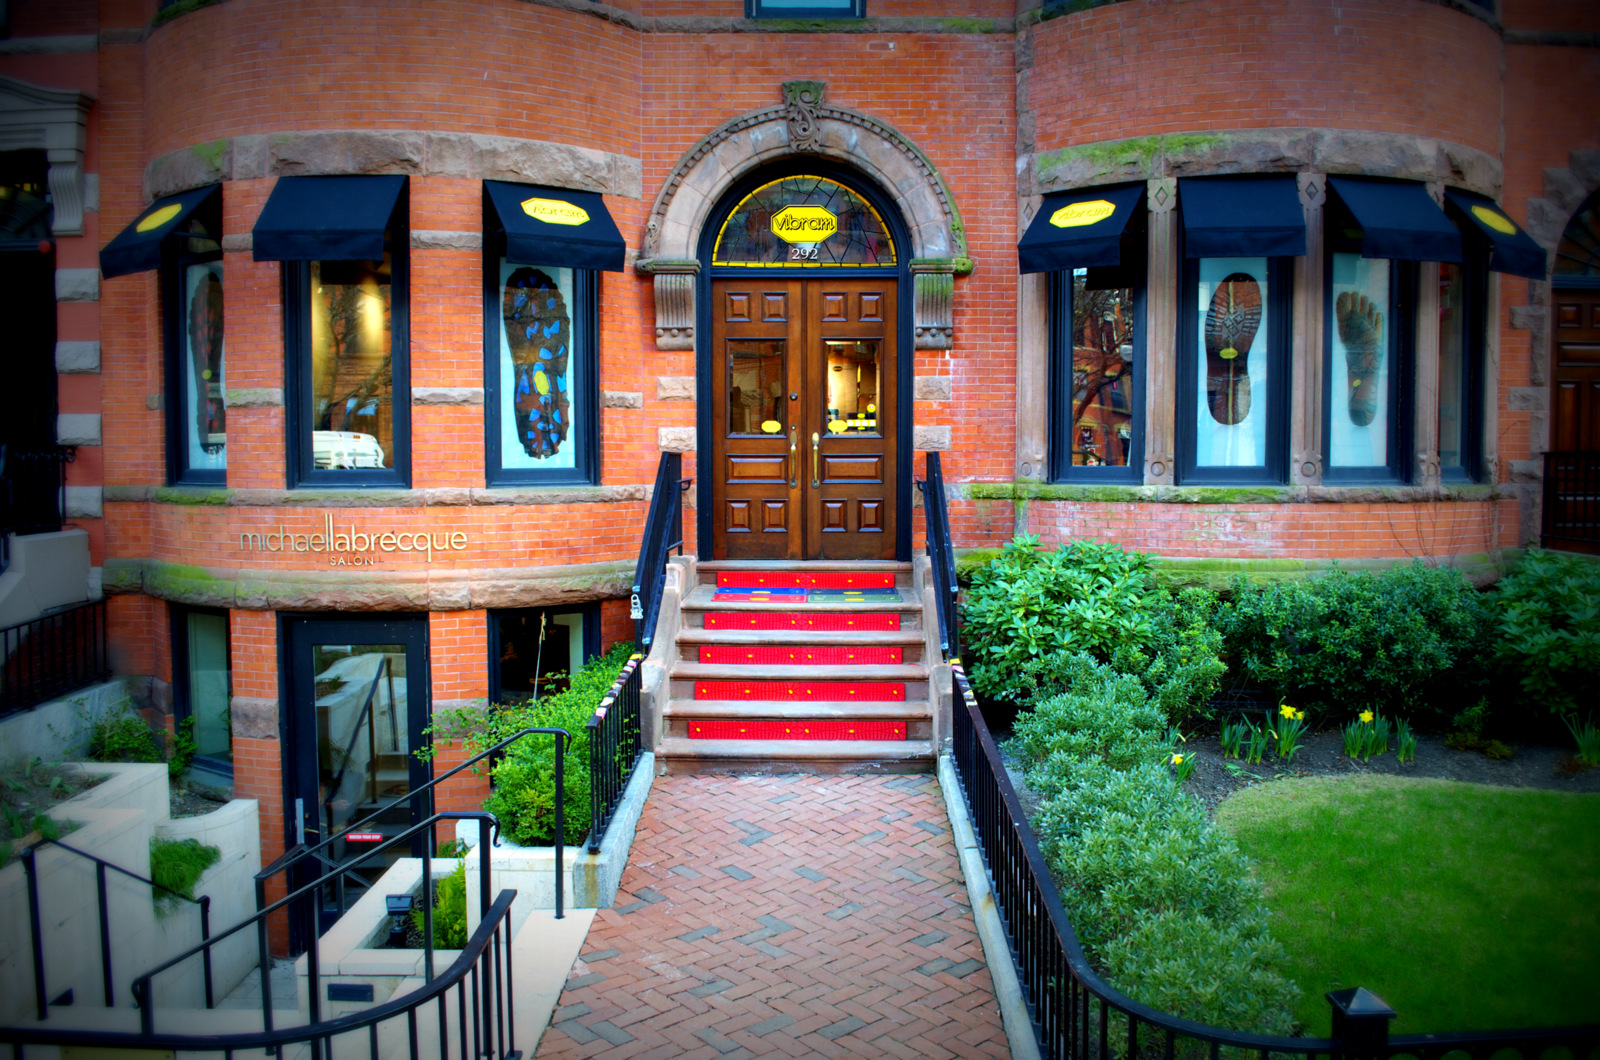 The view from the front of the first Vibram retail store in the United States-located on Newbury Street in Boston, Massachusetts.